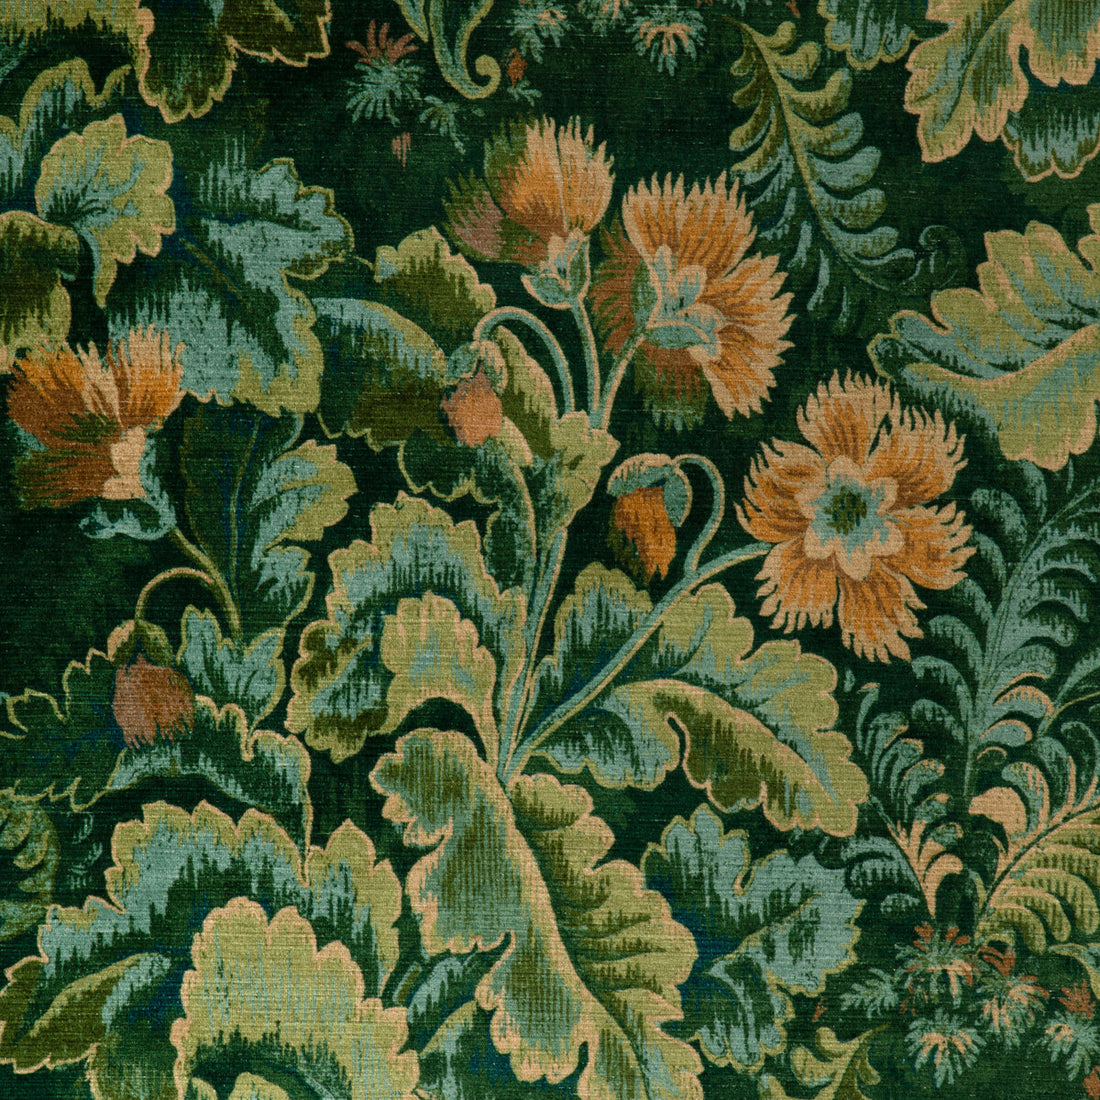 Barwick Velvet fabric in cypress color - pattern 2023112.33.0 - by Lee Jofa in the Barwick Velvets collection